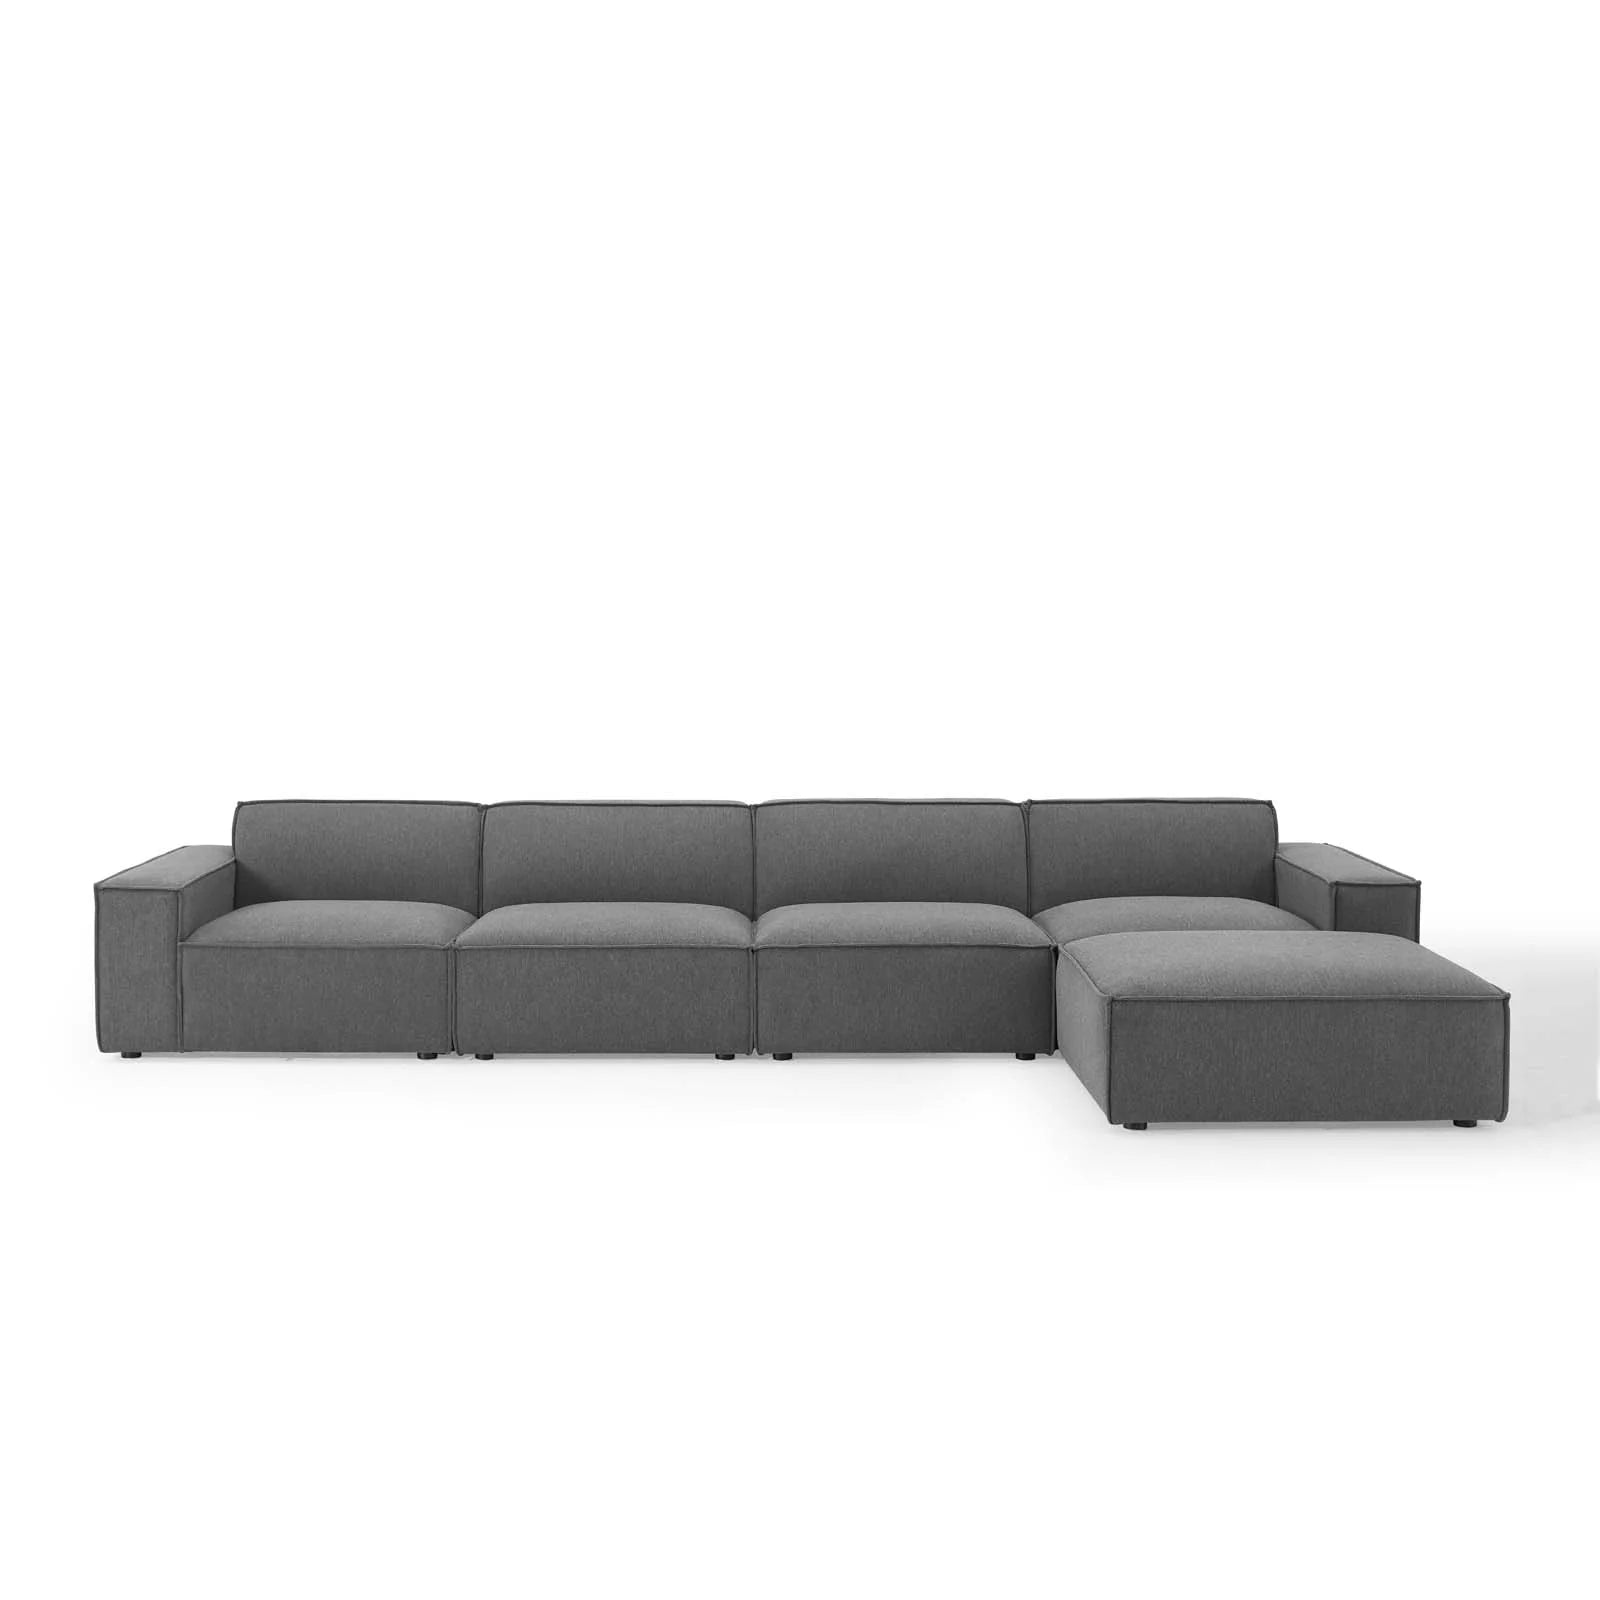 BREEZE 5 PIECE EXTENDED SECTIONAL - CHARCOAL